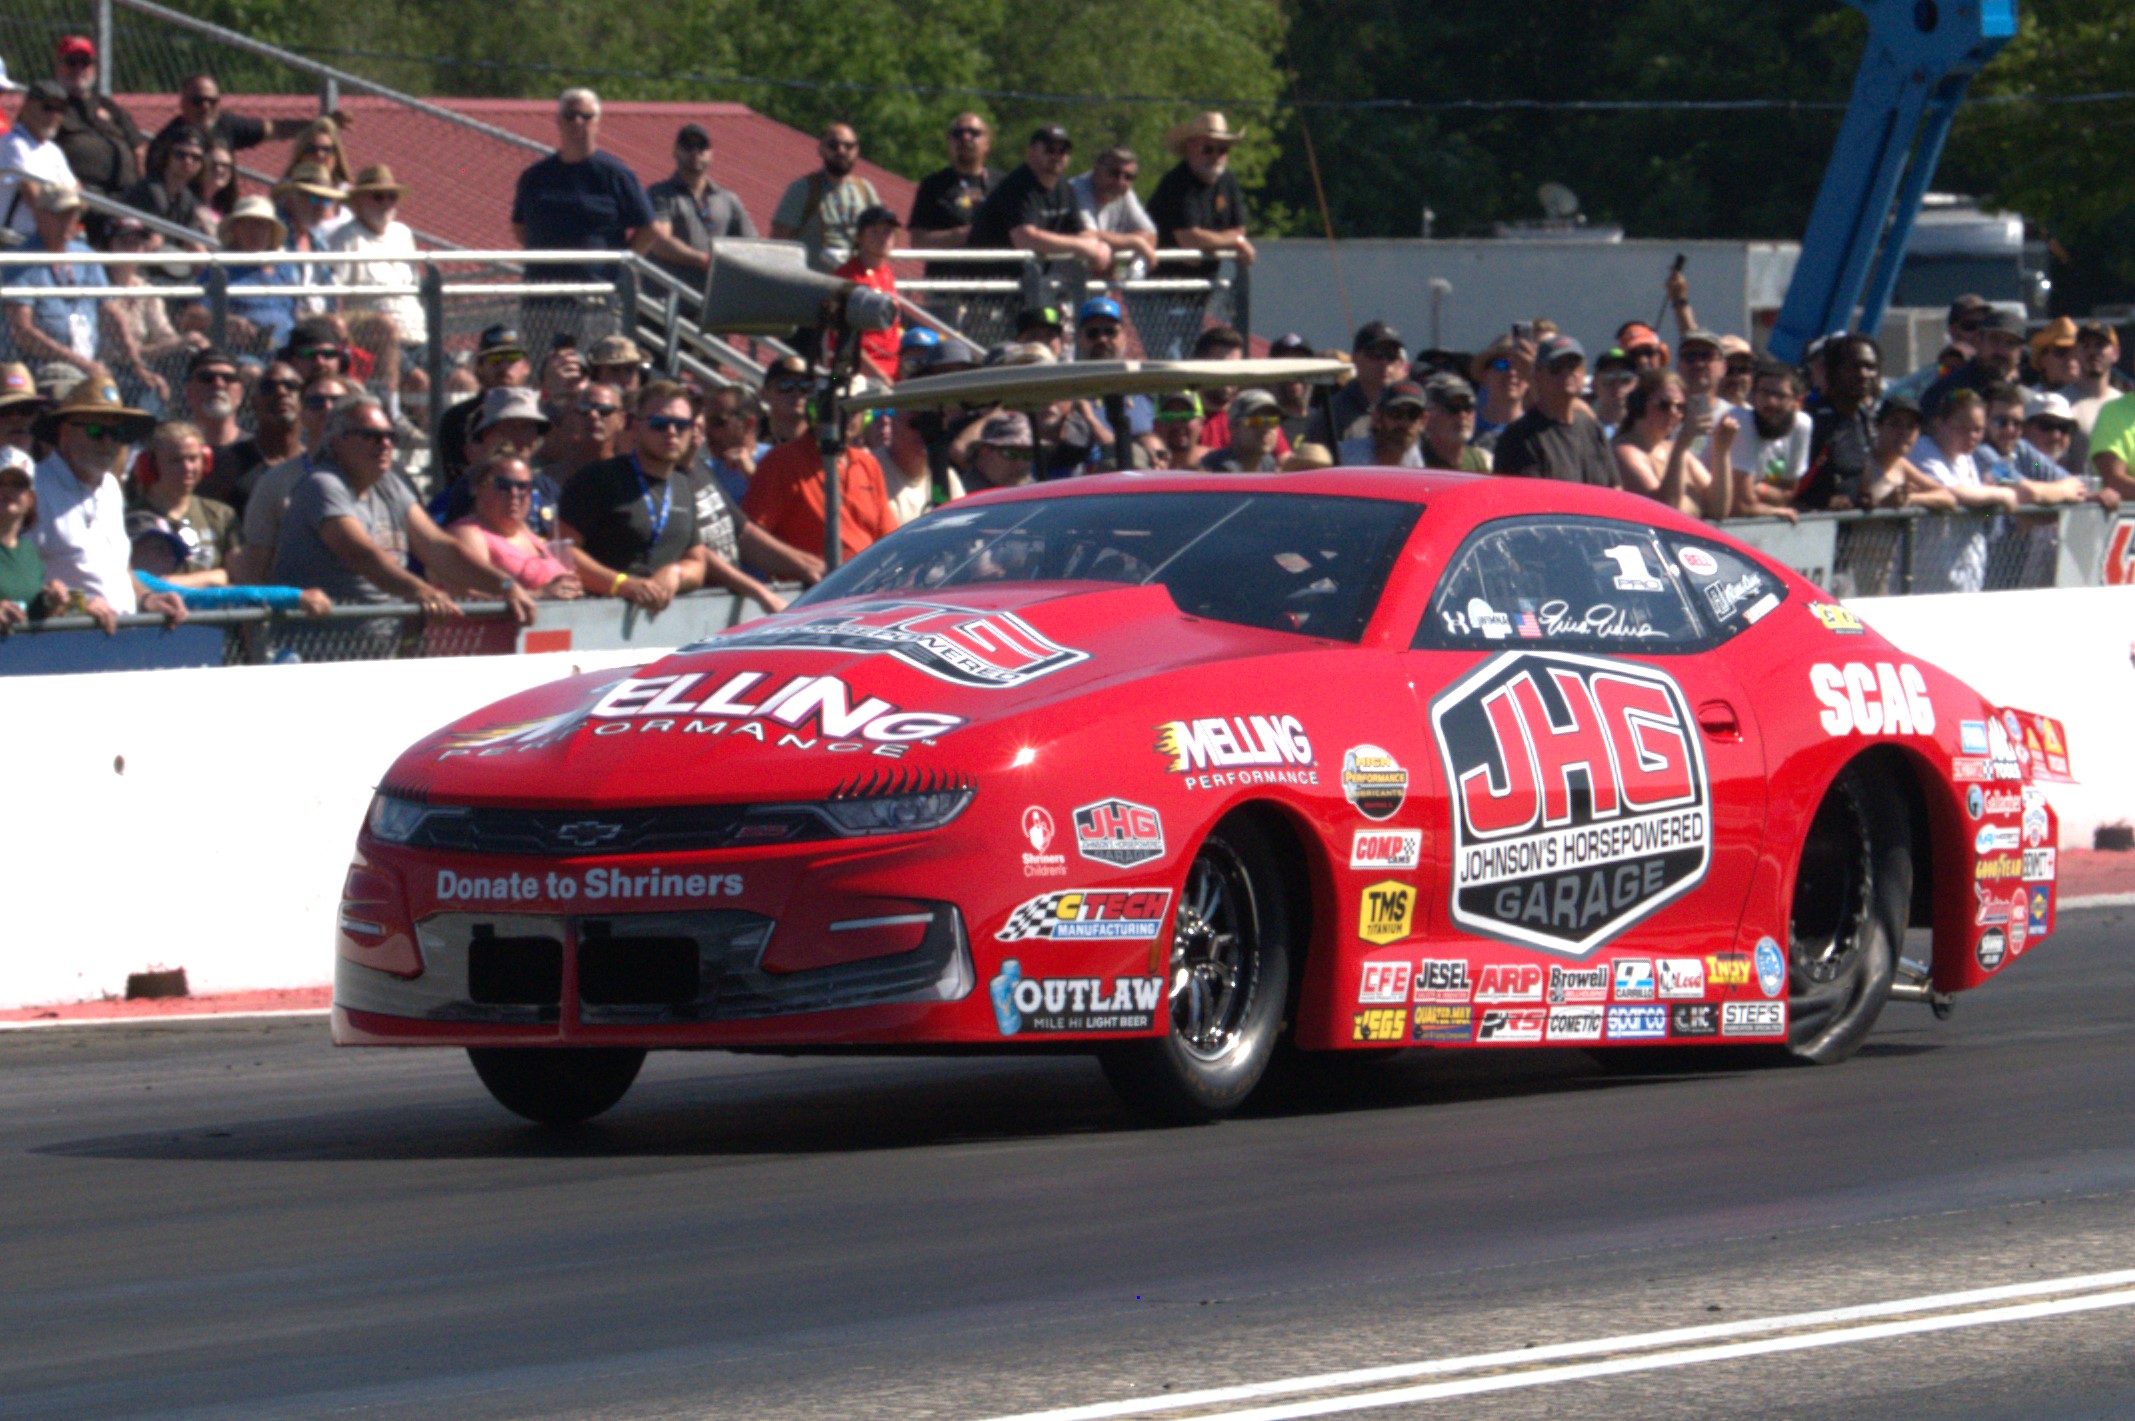 Erica Enders knocked out a 6.488 second run to take the No. 1 spot in Pro Stock qualifying.